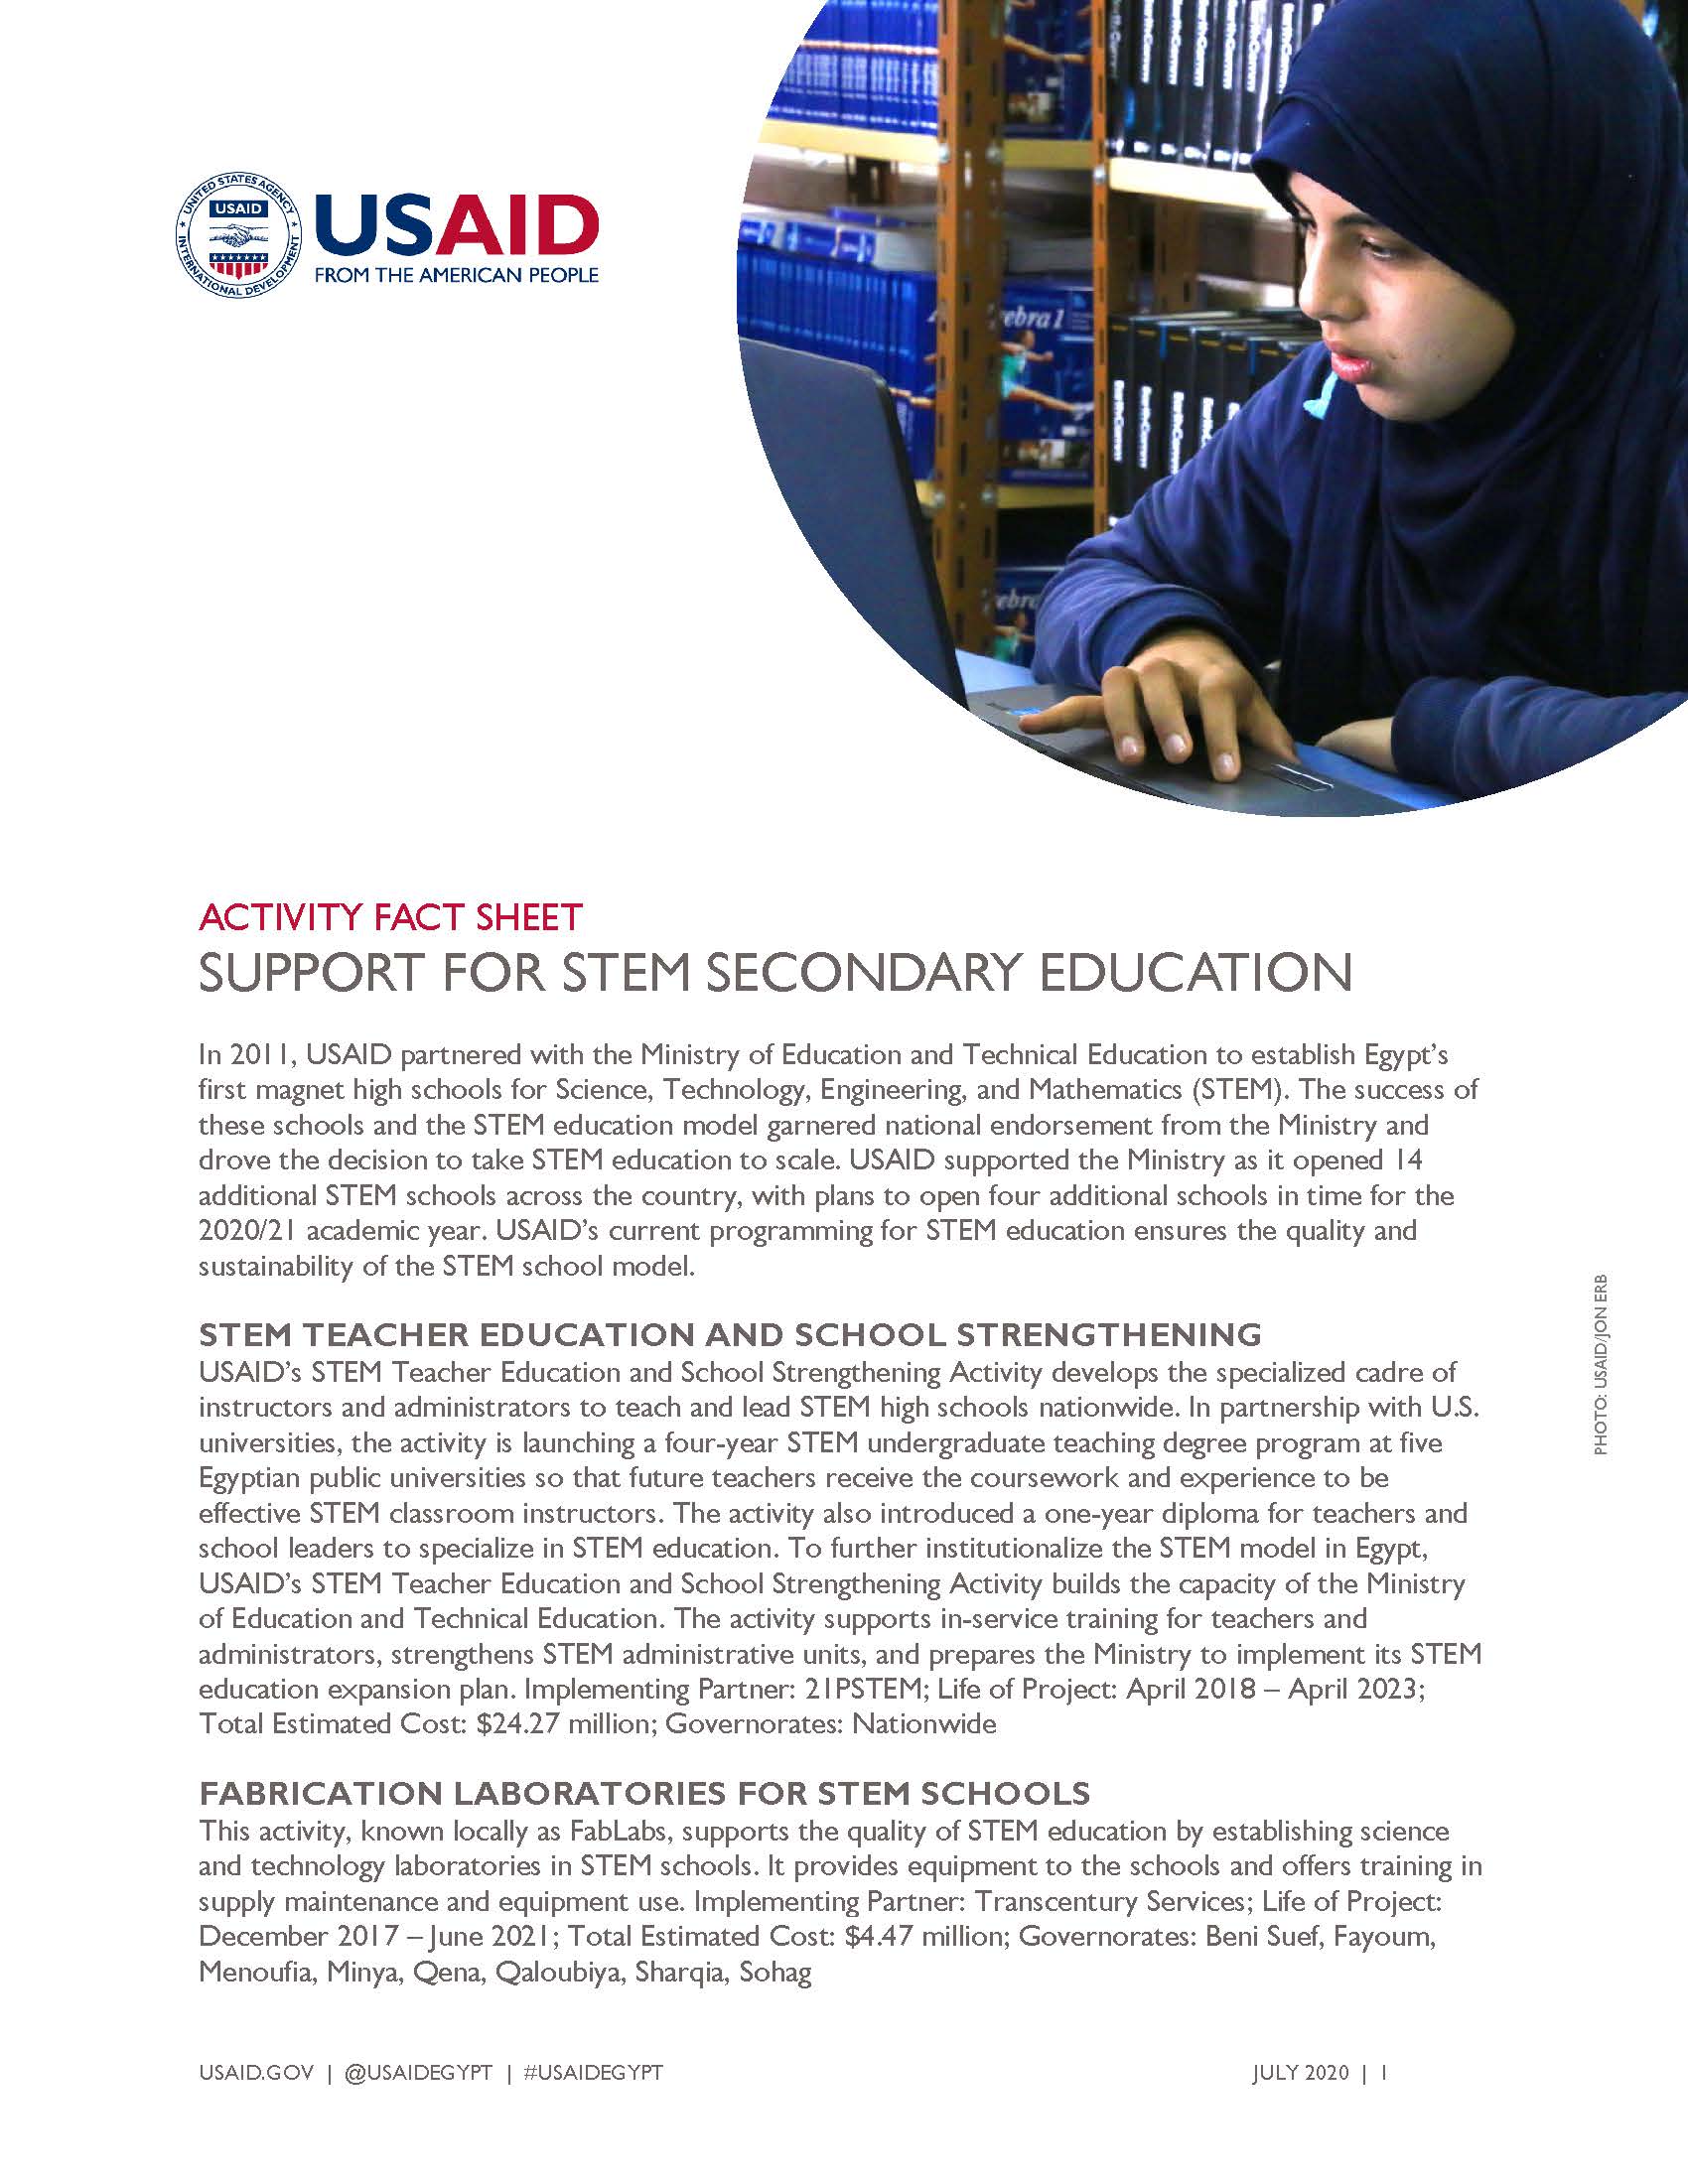 USAID/Egypt Activity Fact Sheet: Support for STEM Secondary Education